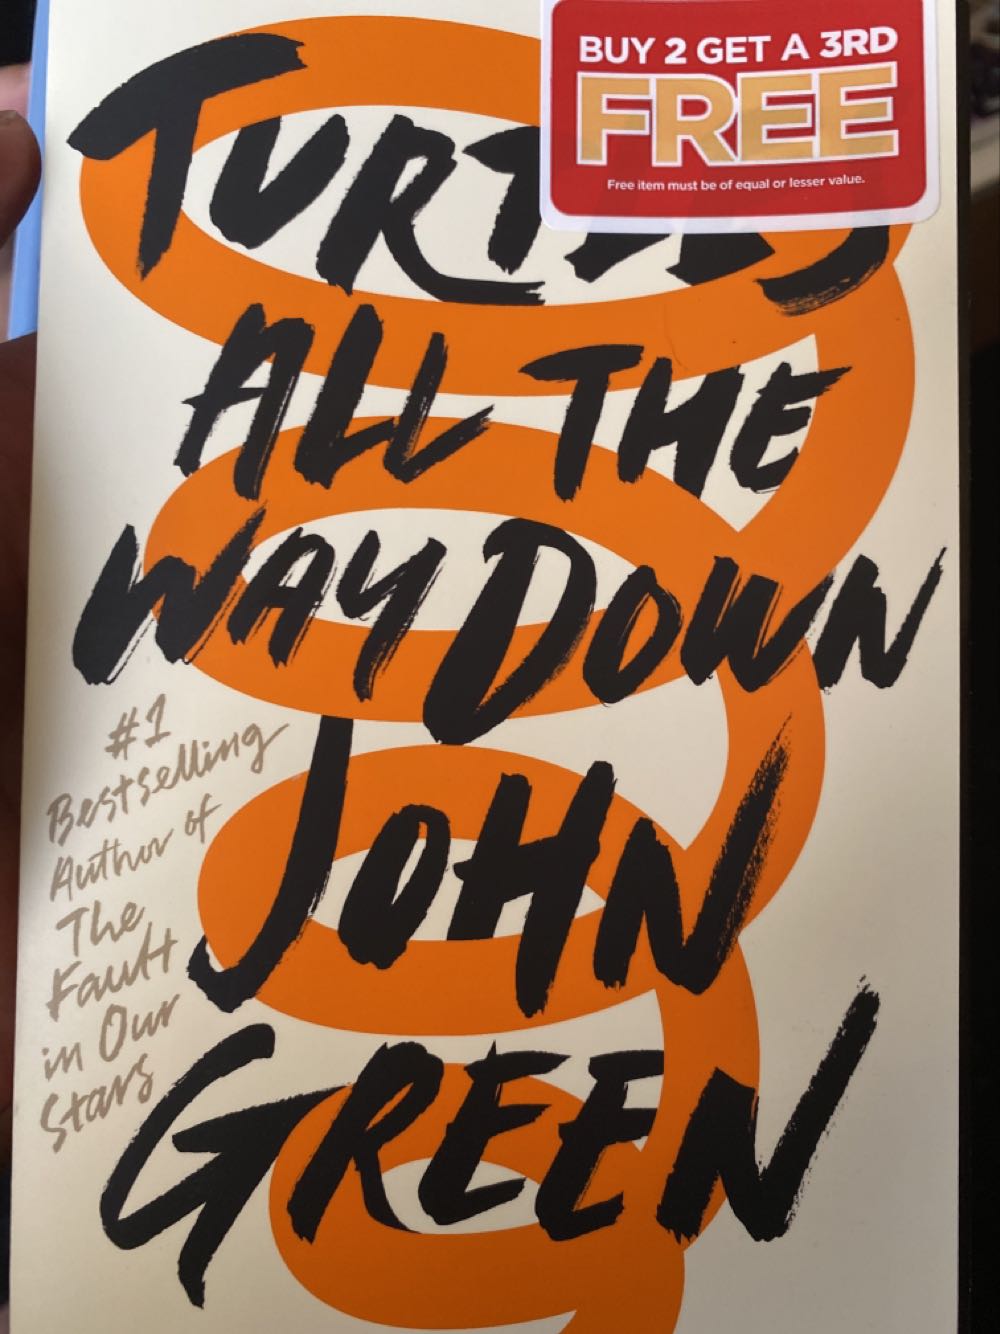 Turtles All The Way Down - John Green (Penguin Books, an imprint of Penguin Random House LLC - Paperback) book collectible [Barcode 9780525555377] - Main Image 1